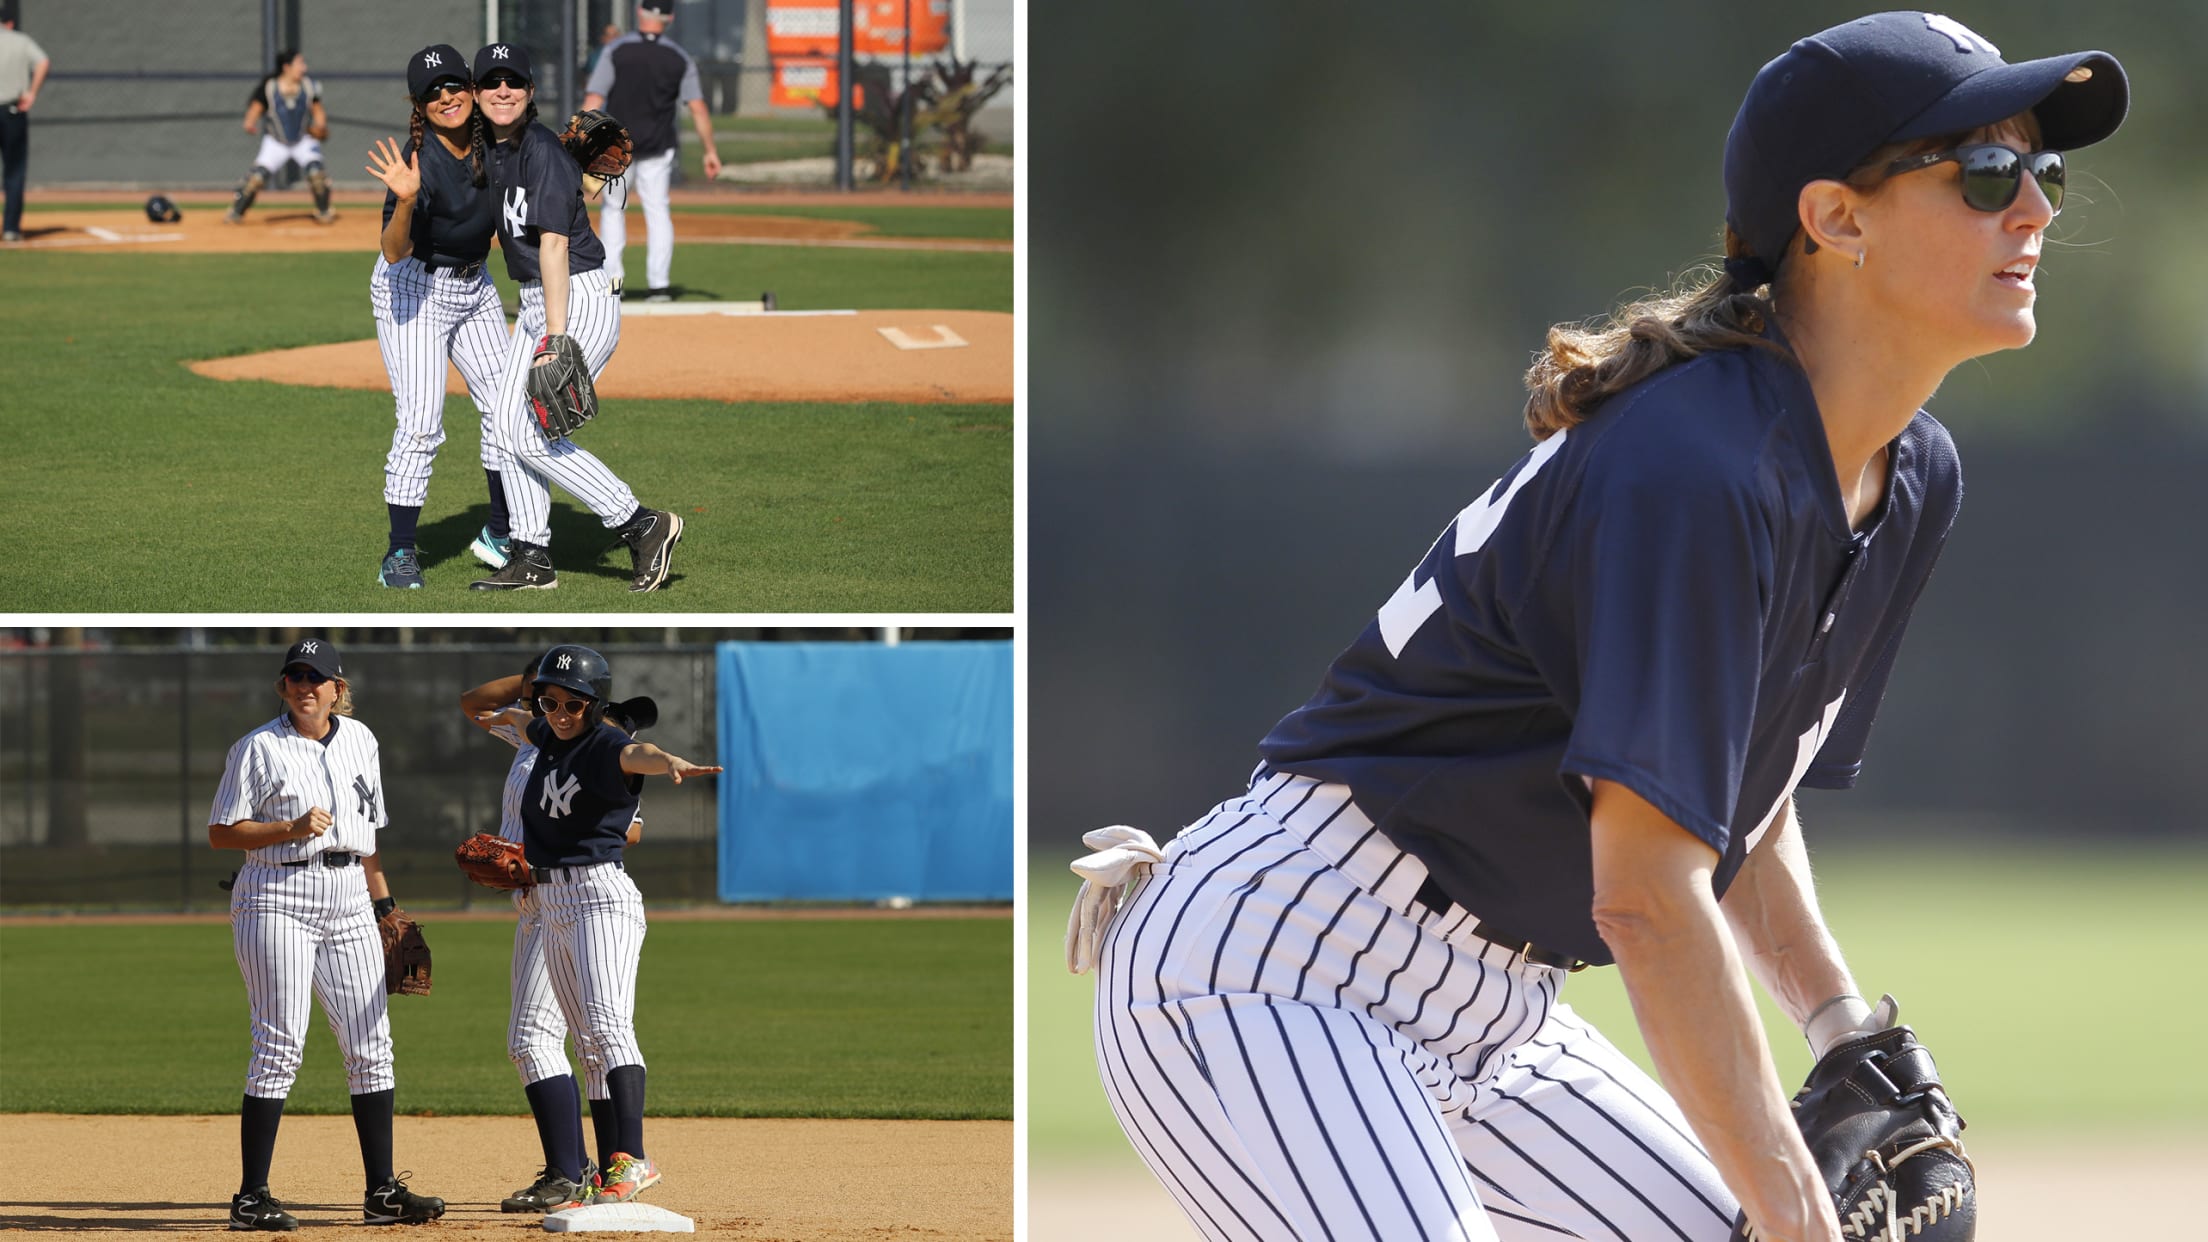 Nyy Women's Fantasy Camp Magazine Ad by Bland+Aid on Dribbble